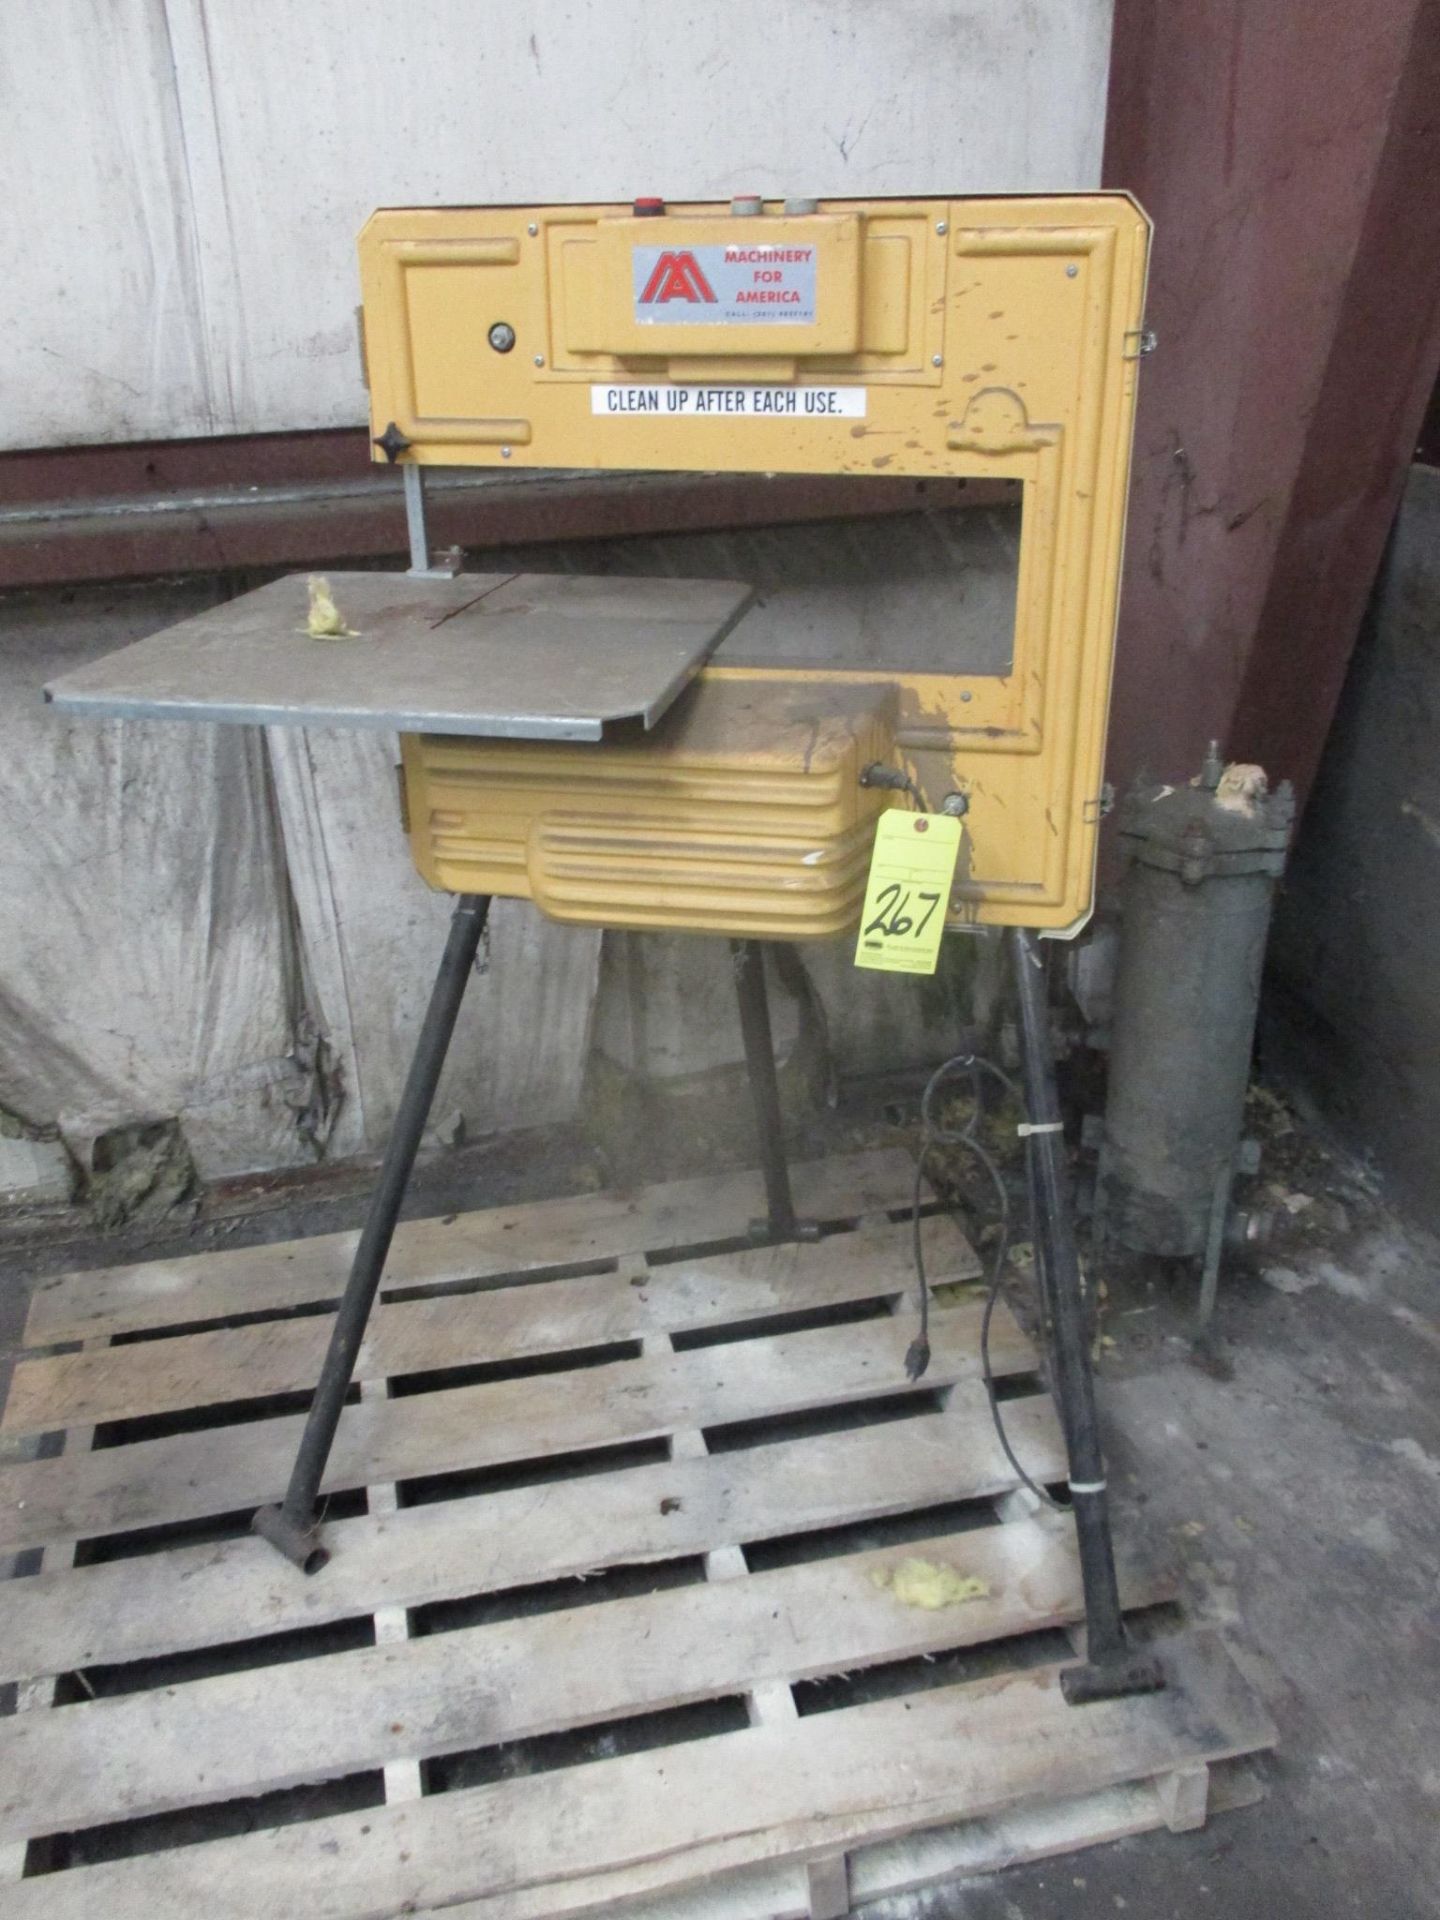 VERTICAL BANDSAW, "MACHINERY FOR AMERICA", 24" throat